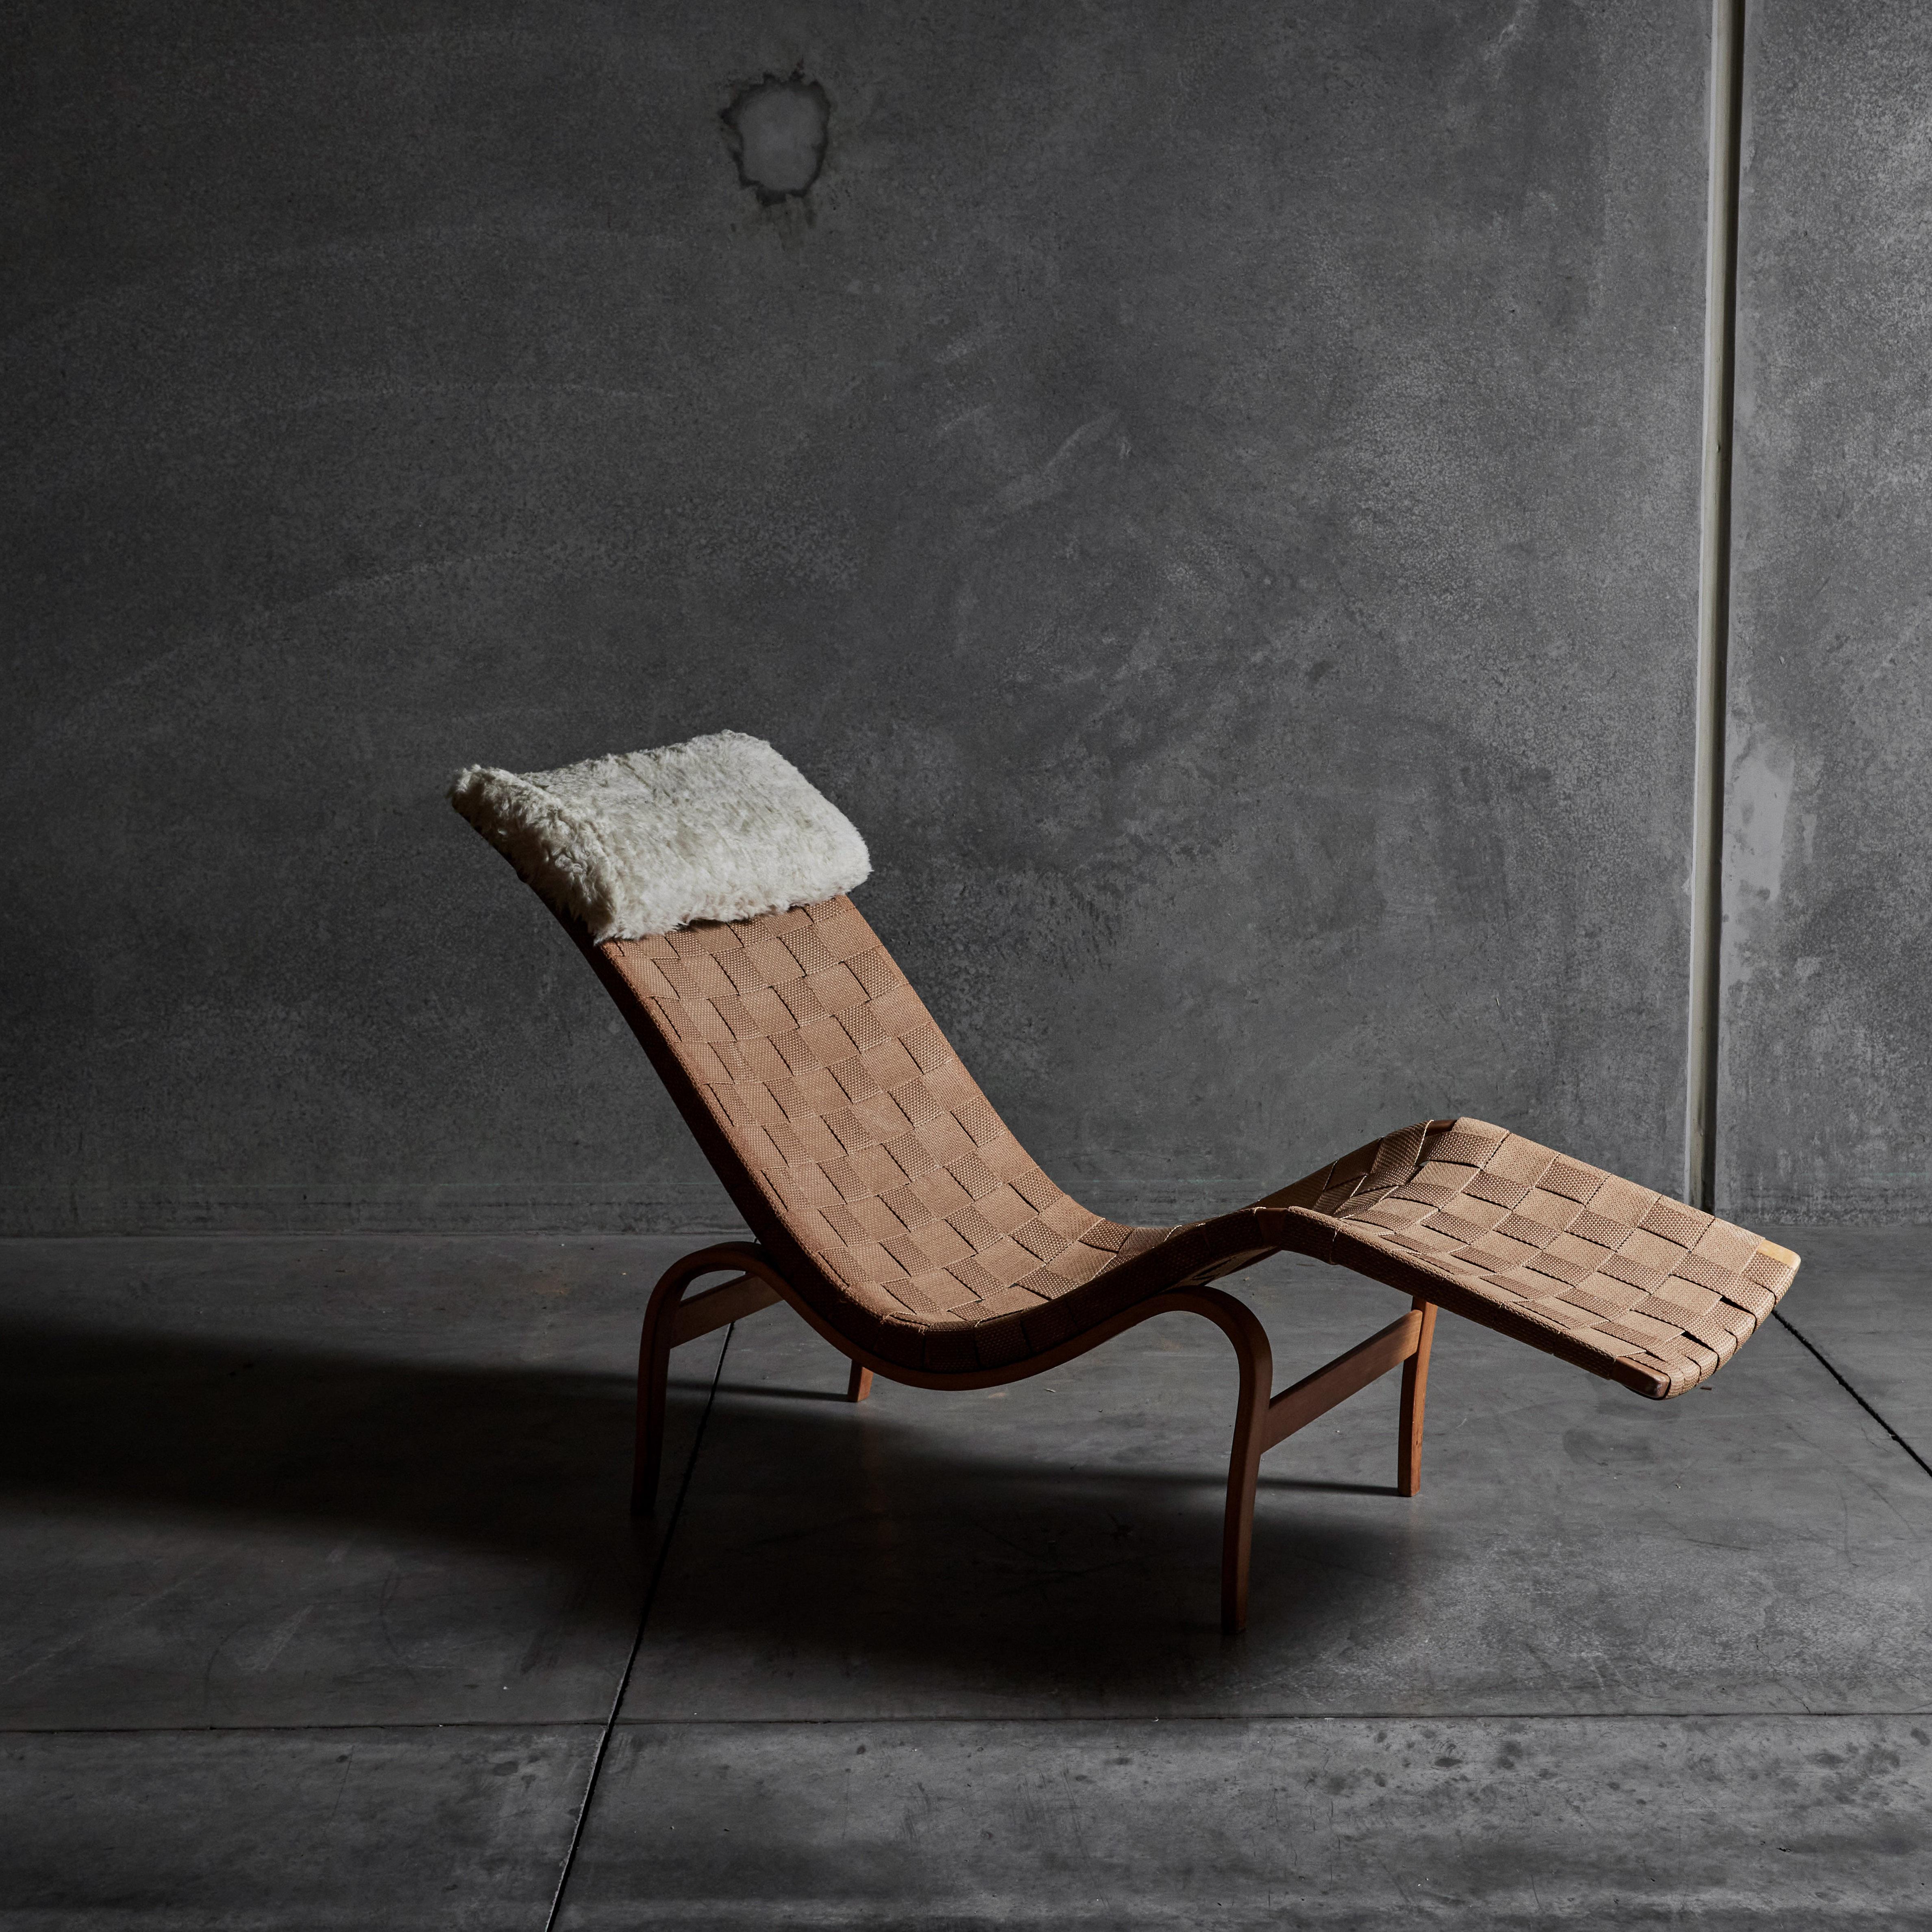 Early chaise lounge with original canvas webbing and detachable sheepskin pillow by Bruno Mathsson for Firma Karl Mathsson. Made in Sweden, circa 1936. Retains all original labels with dates.